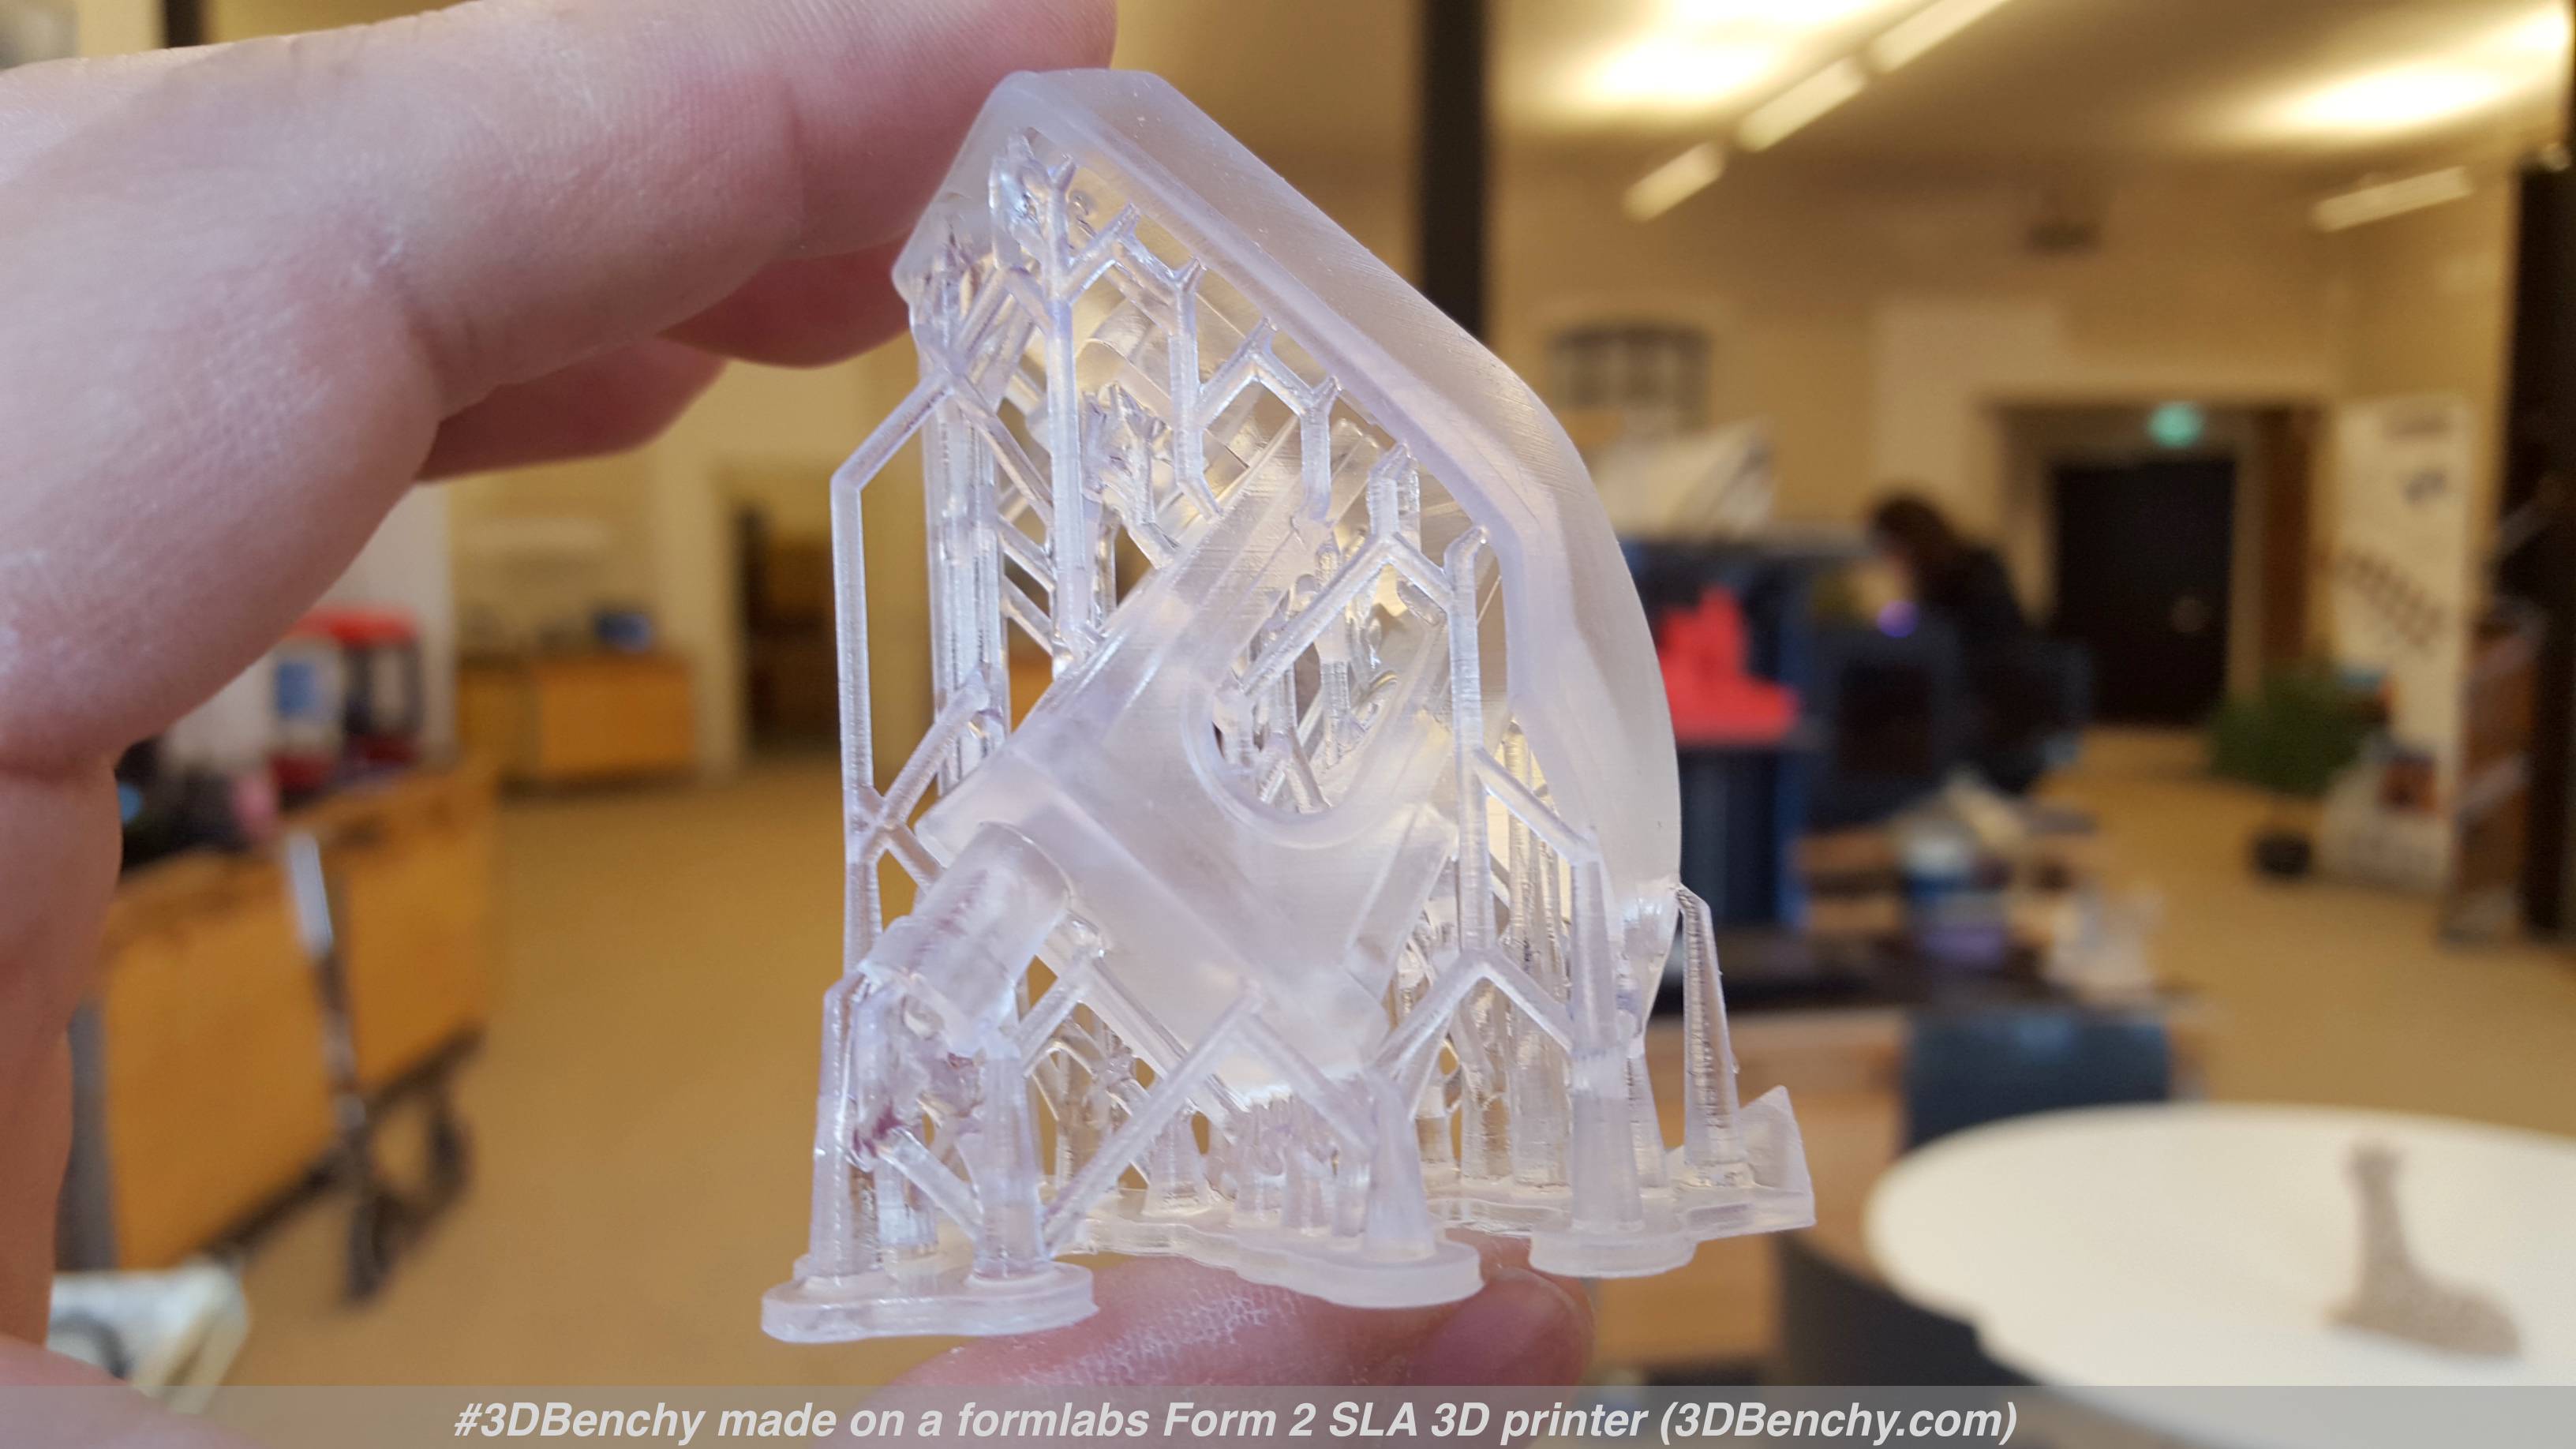 besejret anker Nøjagtighed The formlabs Form 2 makes a #3DBenchy – #3DBenchy